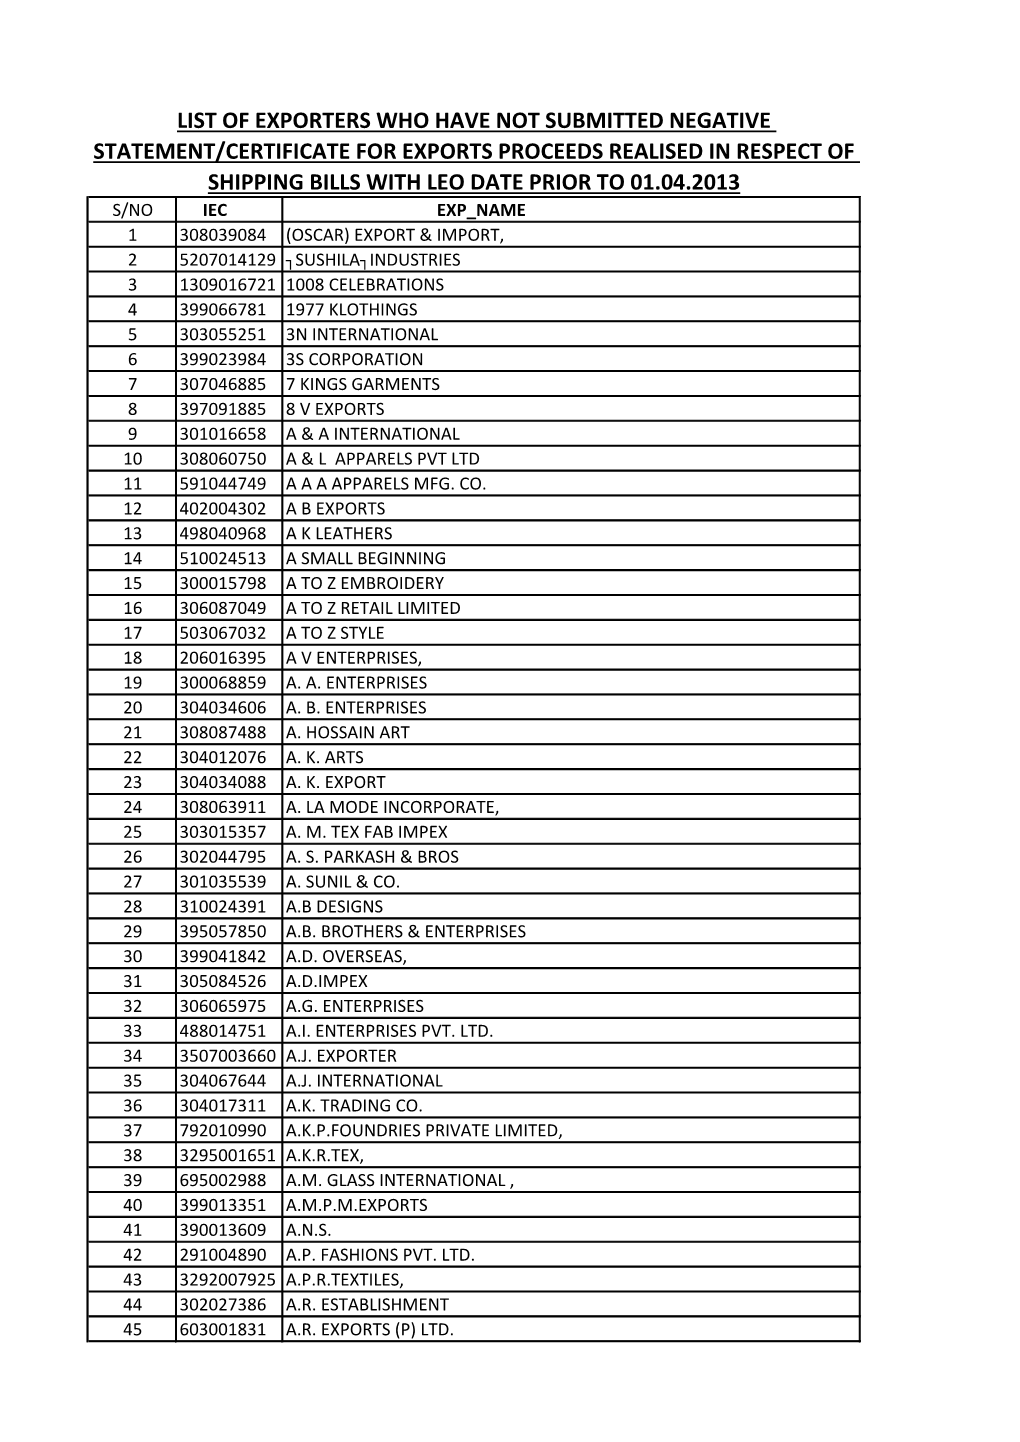 List of Exporters Who Have Not Submitted Negative